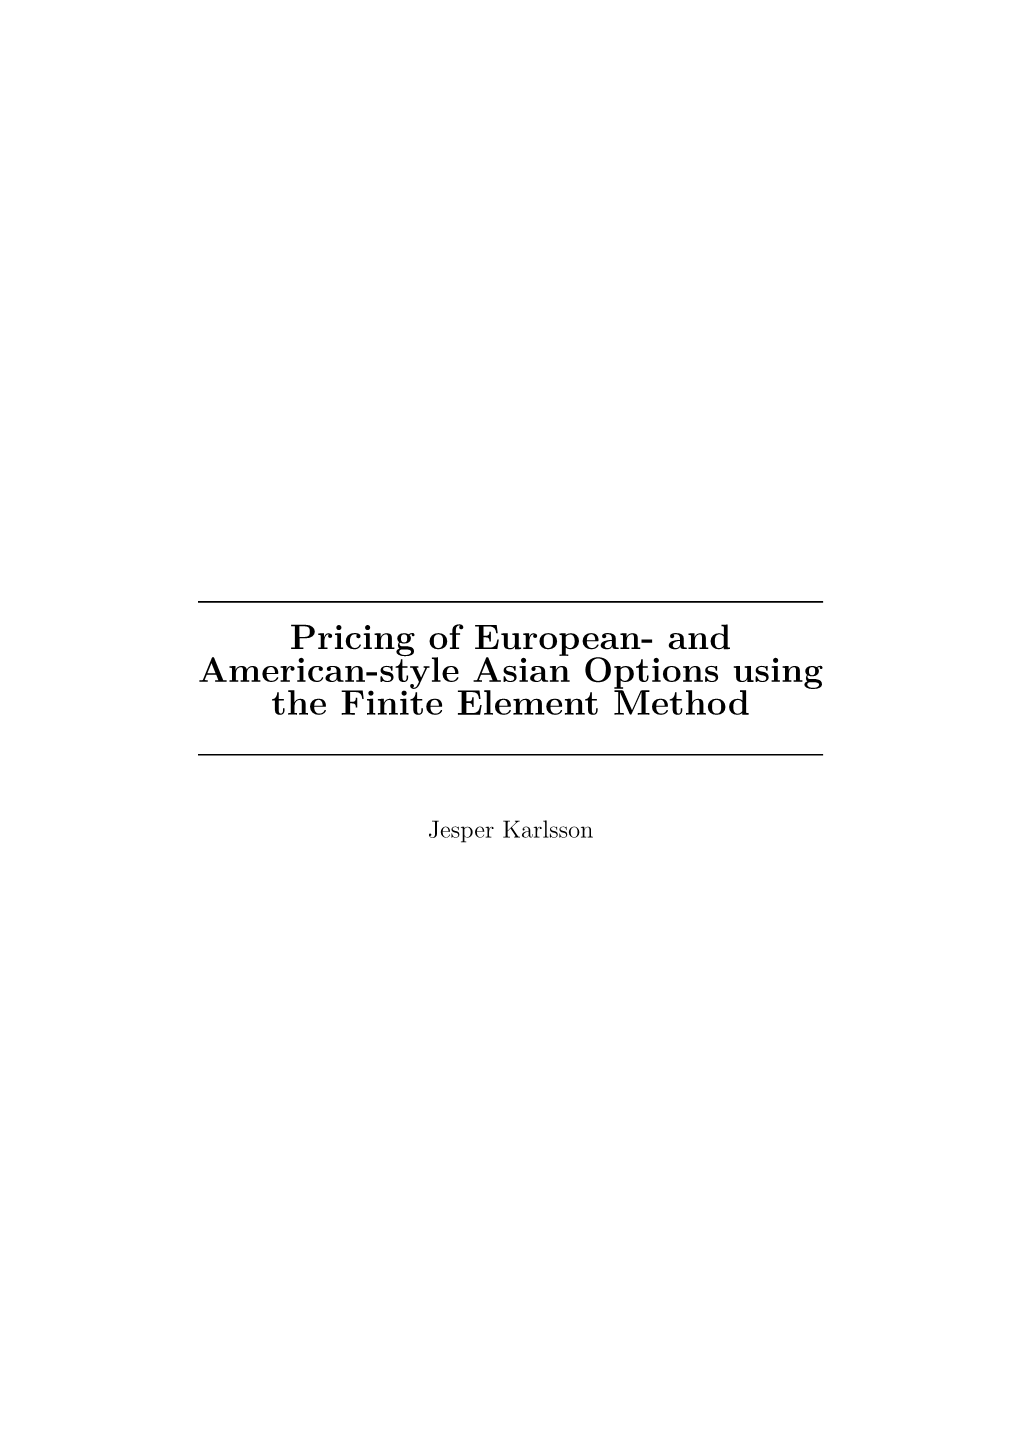 Pricing of European- and American-Style Asian Options Using the Finite Element Method